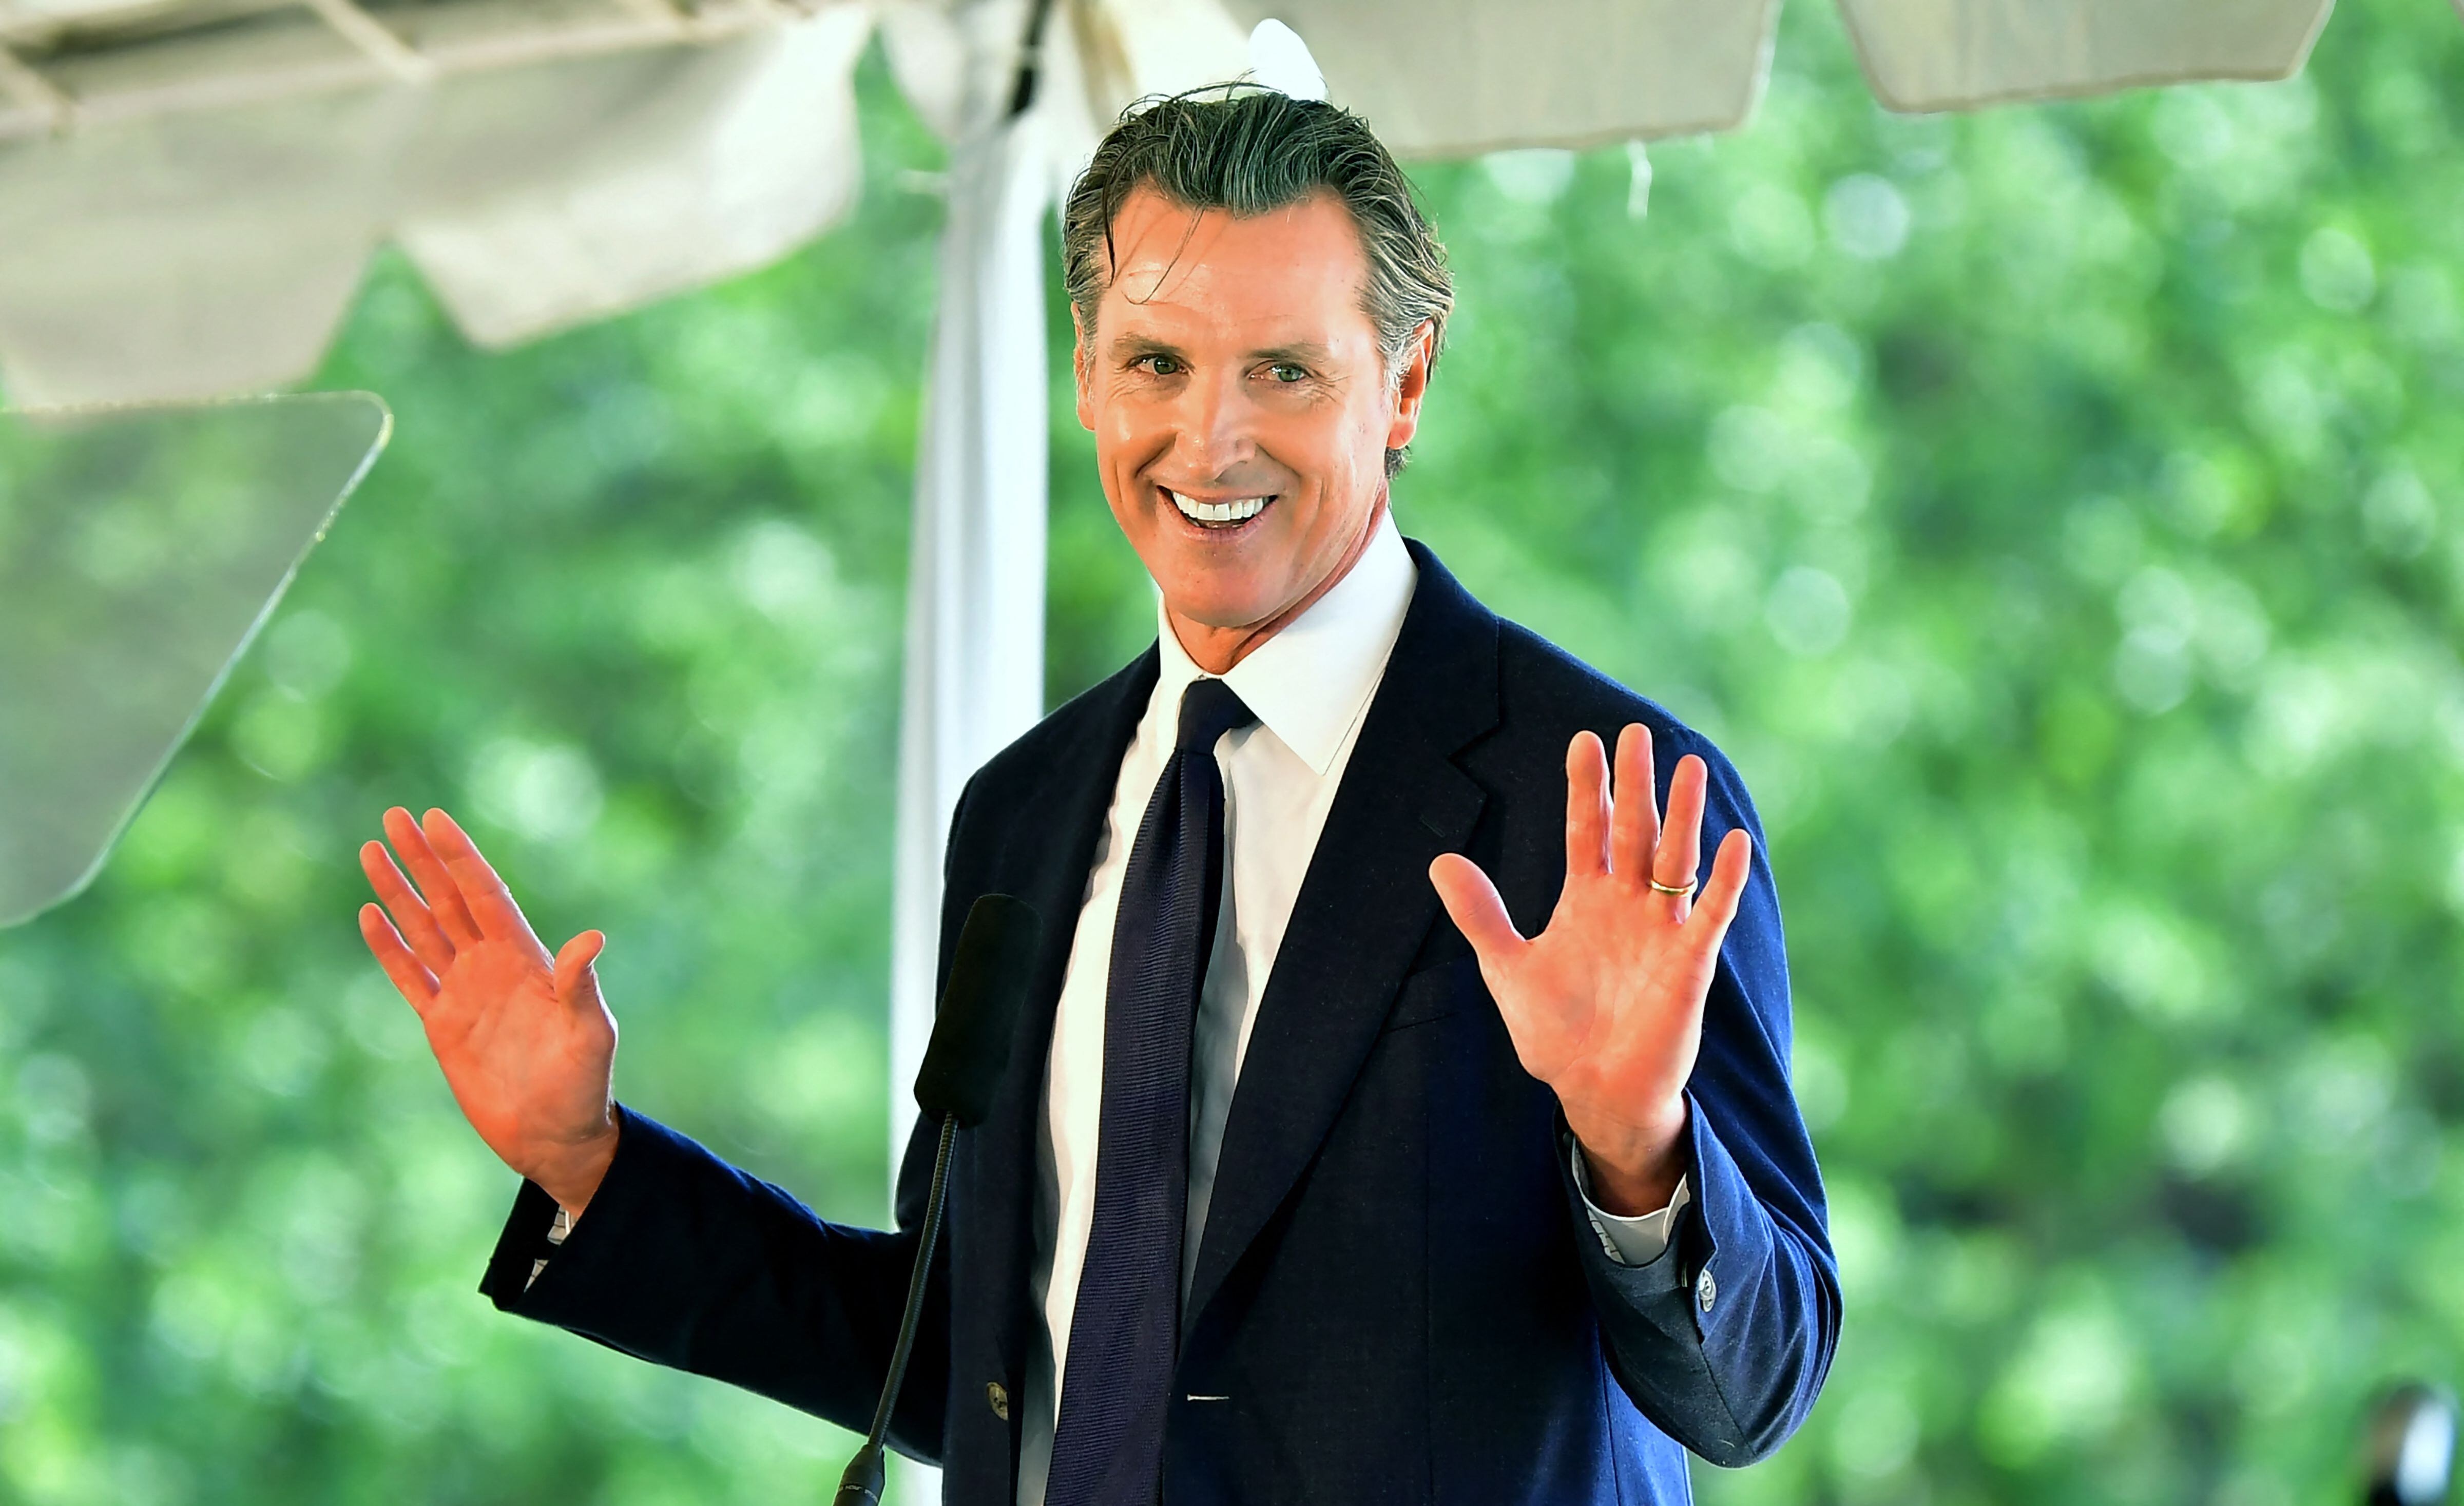 Newsom has been governor of California since 2018. (Photo: AFP)